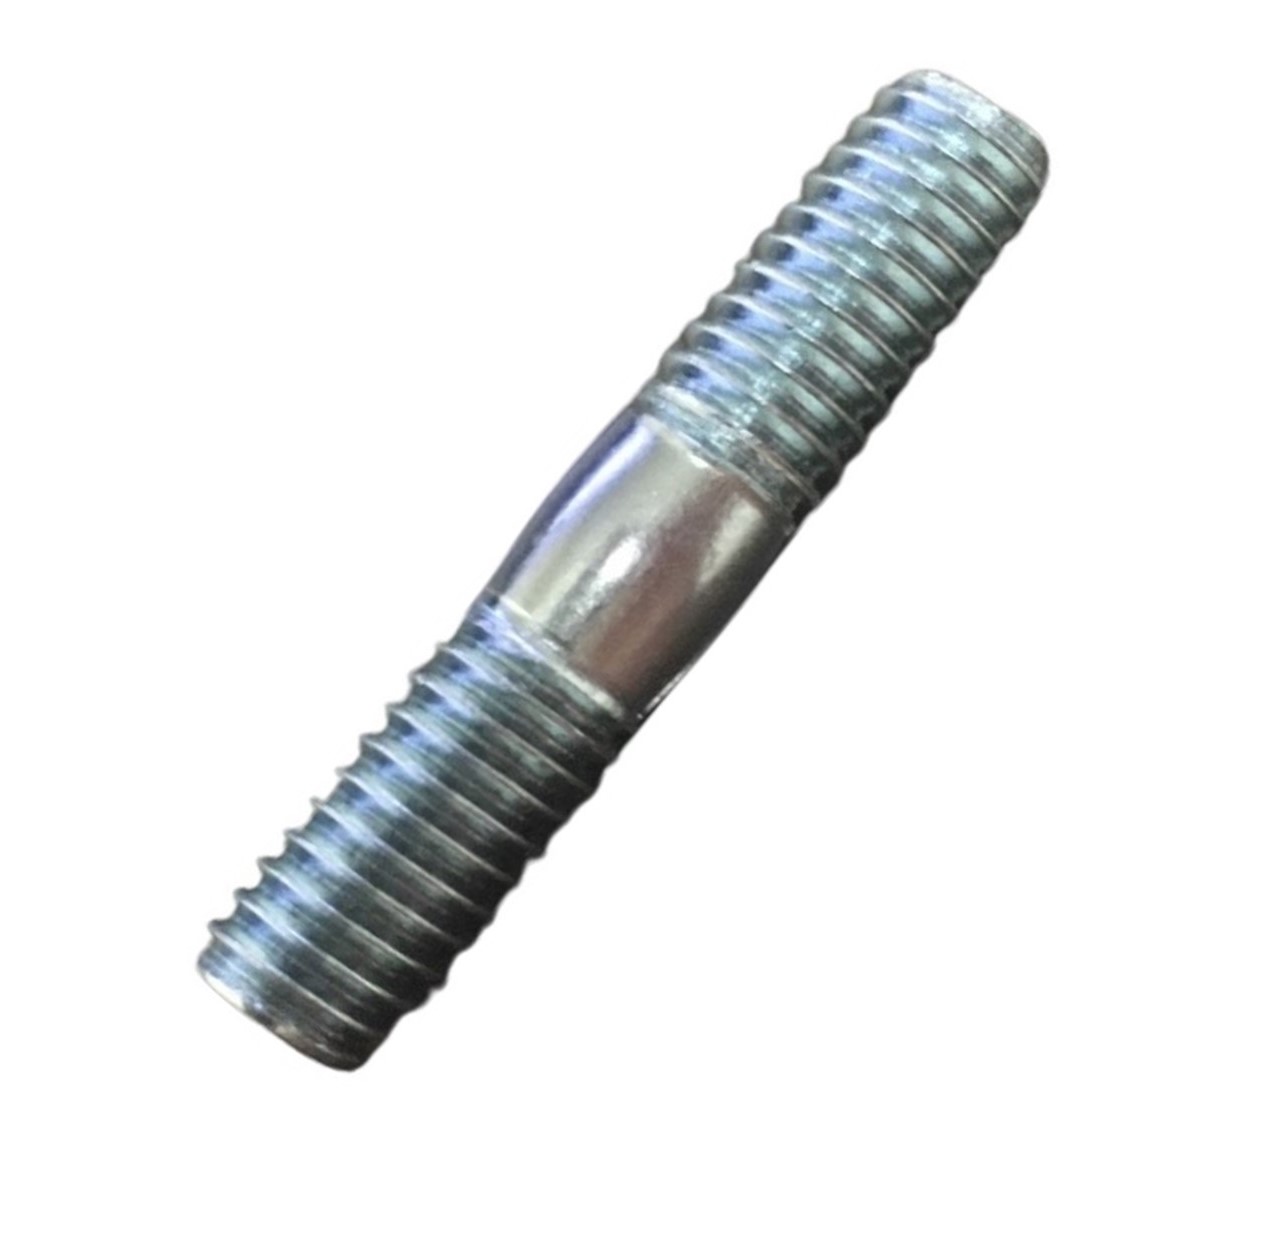 EXHAUST STUD SOLD PER PC 6mm X 30mm Fit Most 40-300cc Motors, GY6-50-125-150, used on Scooters, ATVs, Dirt Bikes, & Go Karts - Click Image to Close